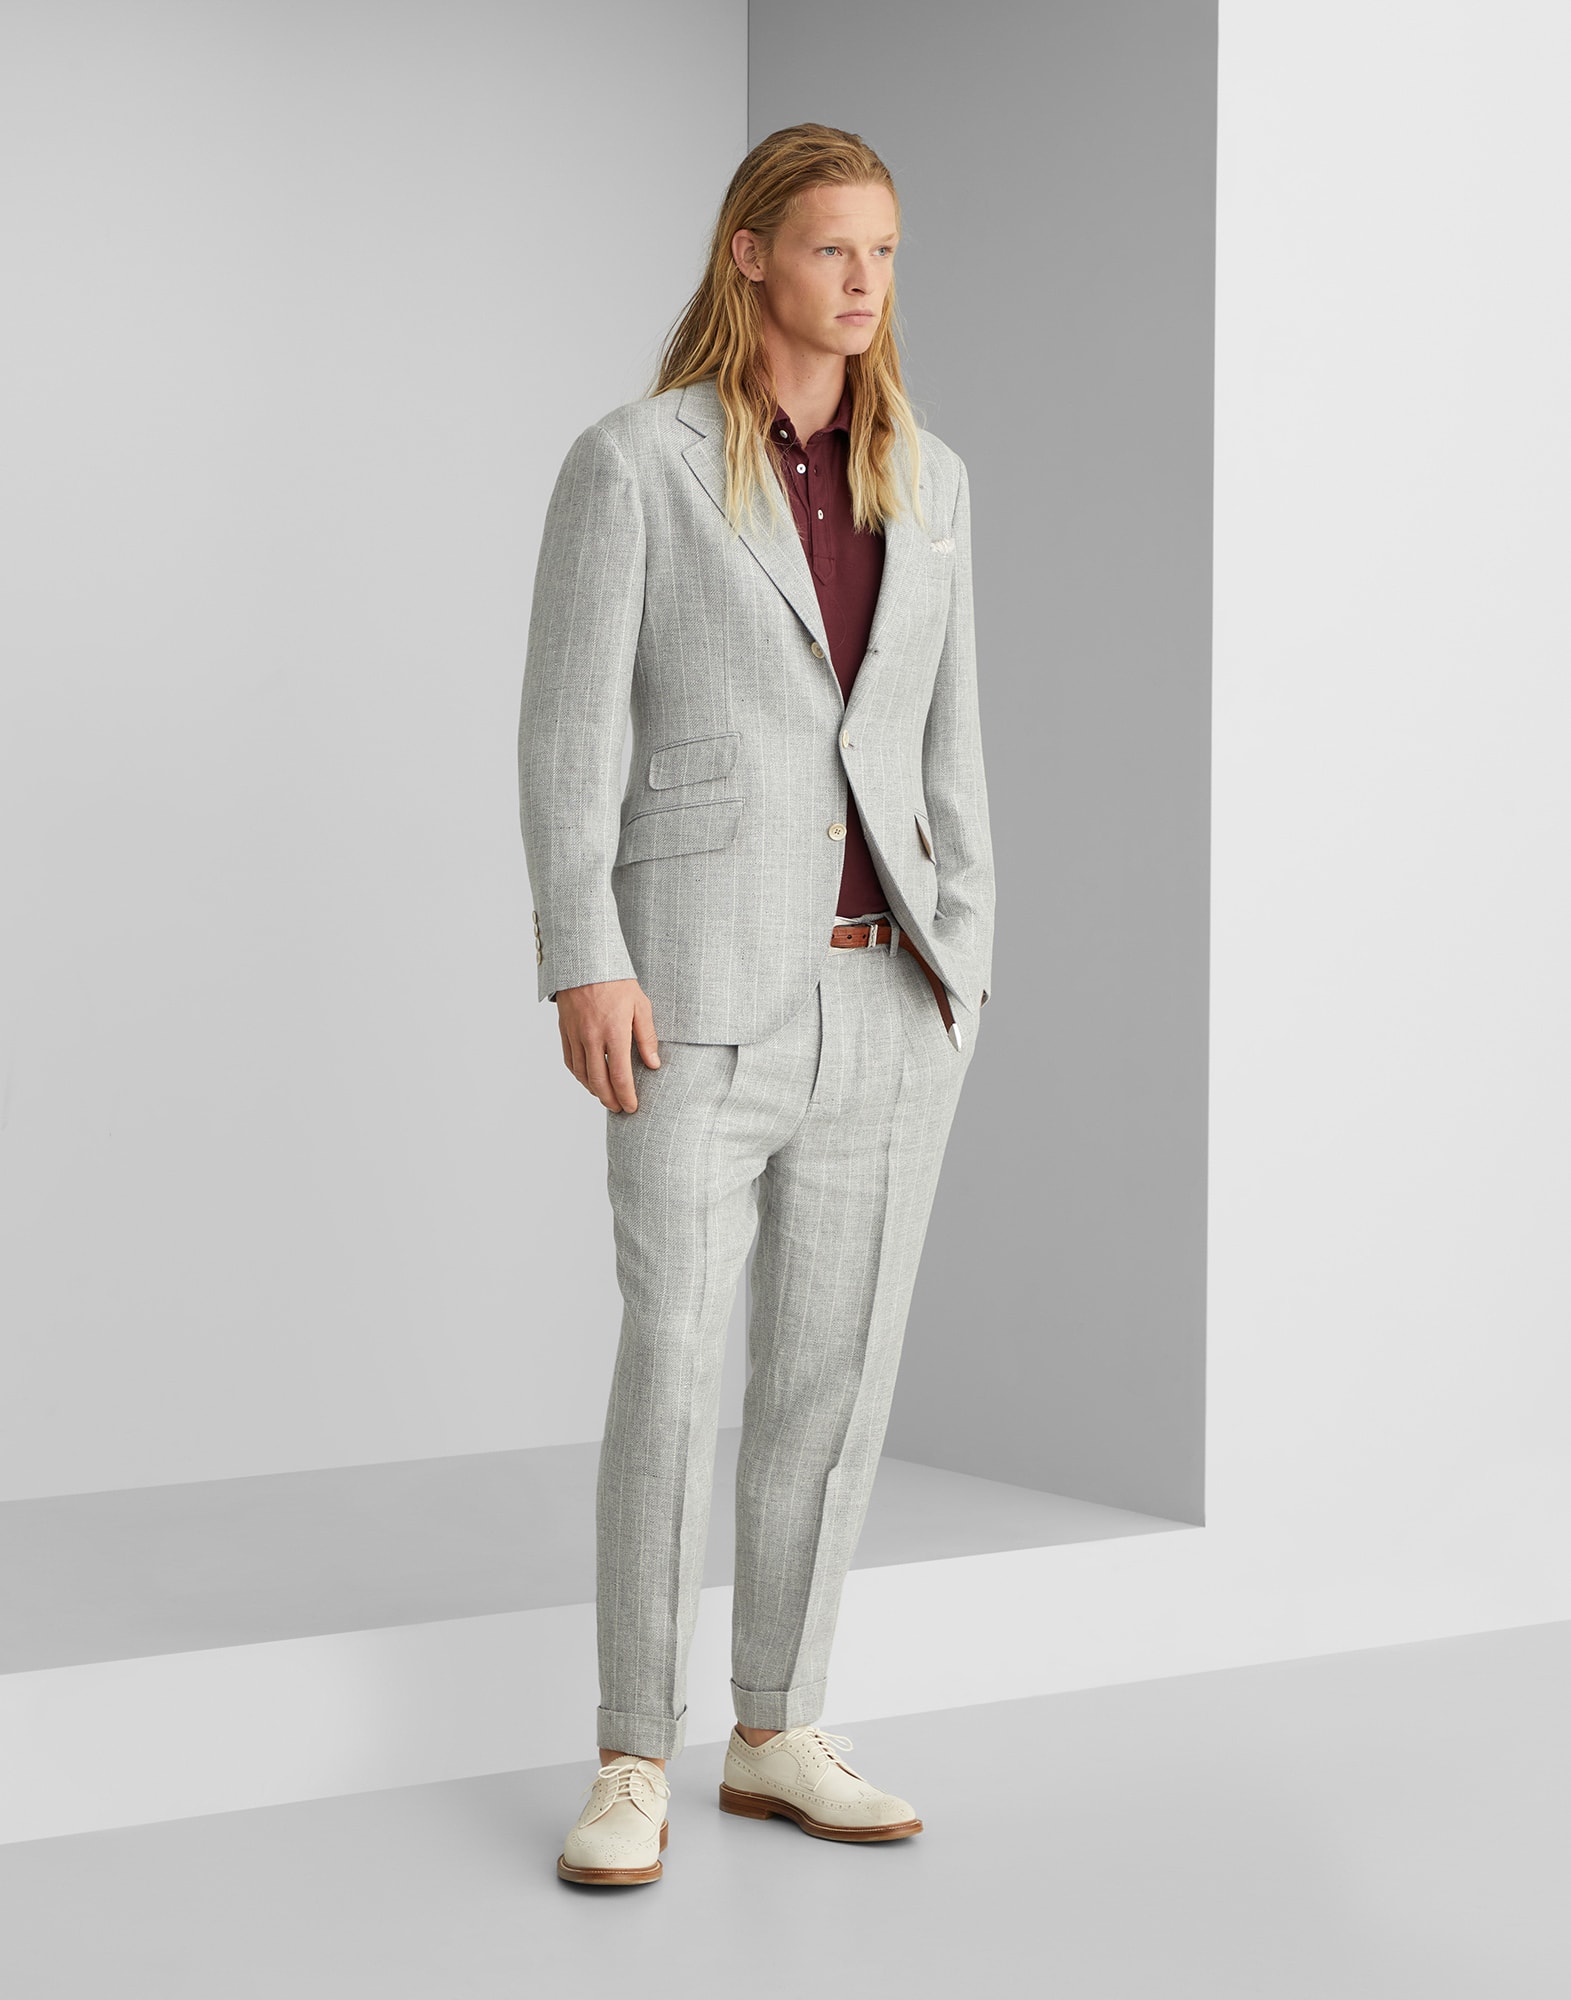 Discover Look 241MOUTFITMW461LDWHC2011 - Brunello Cucinelli